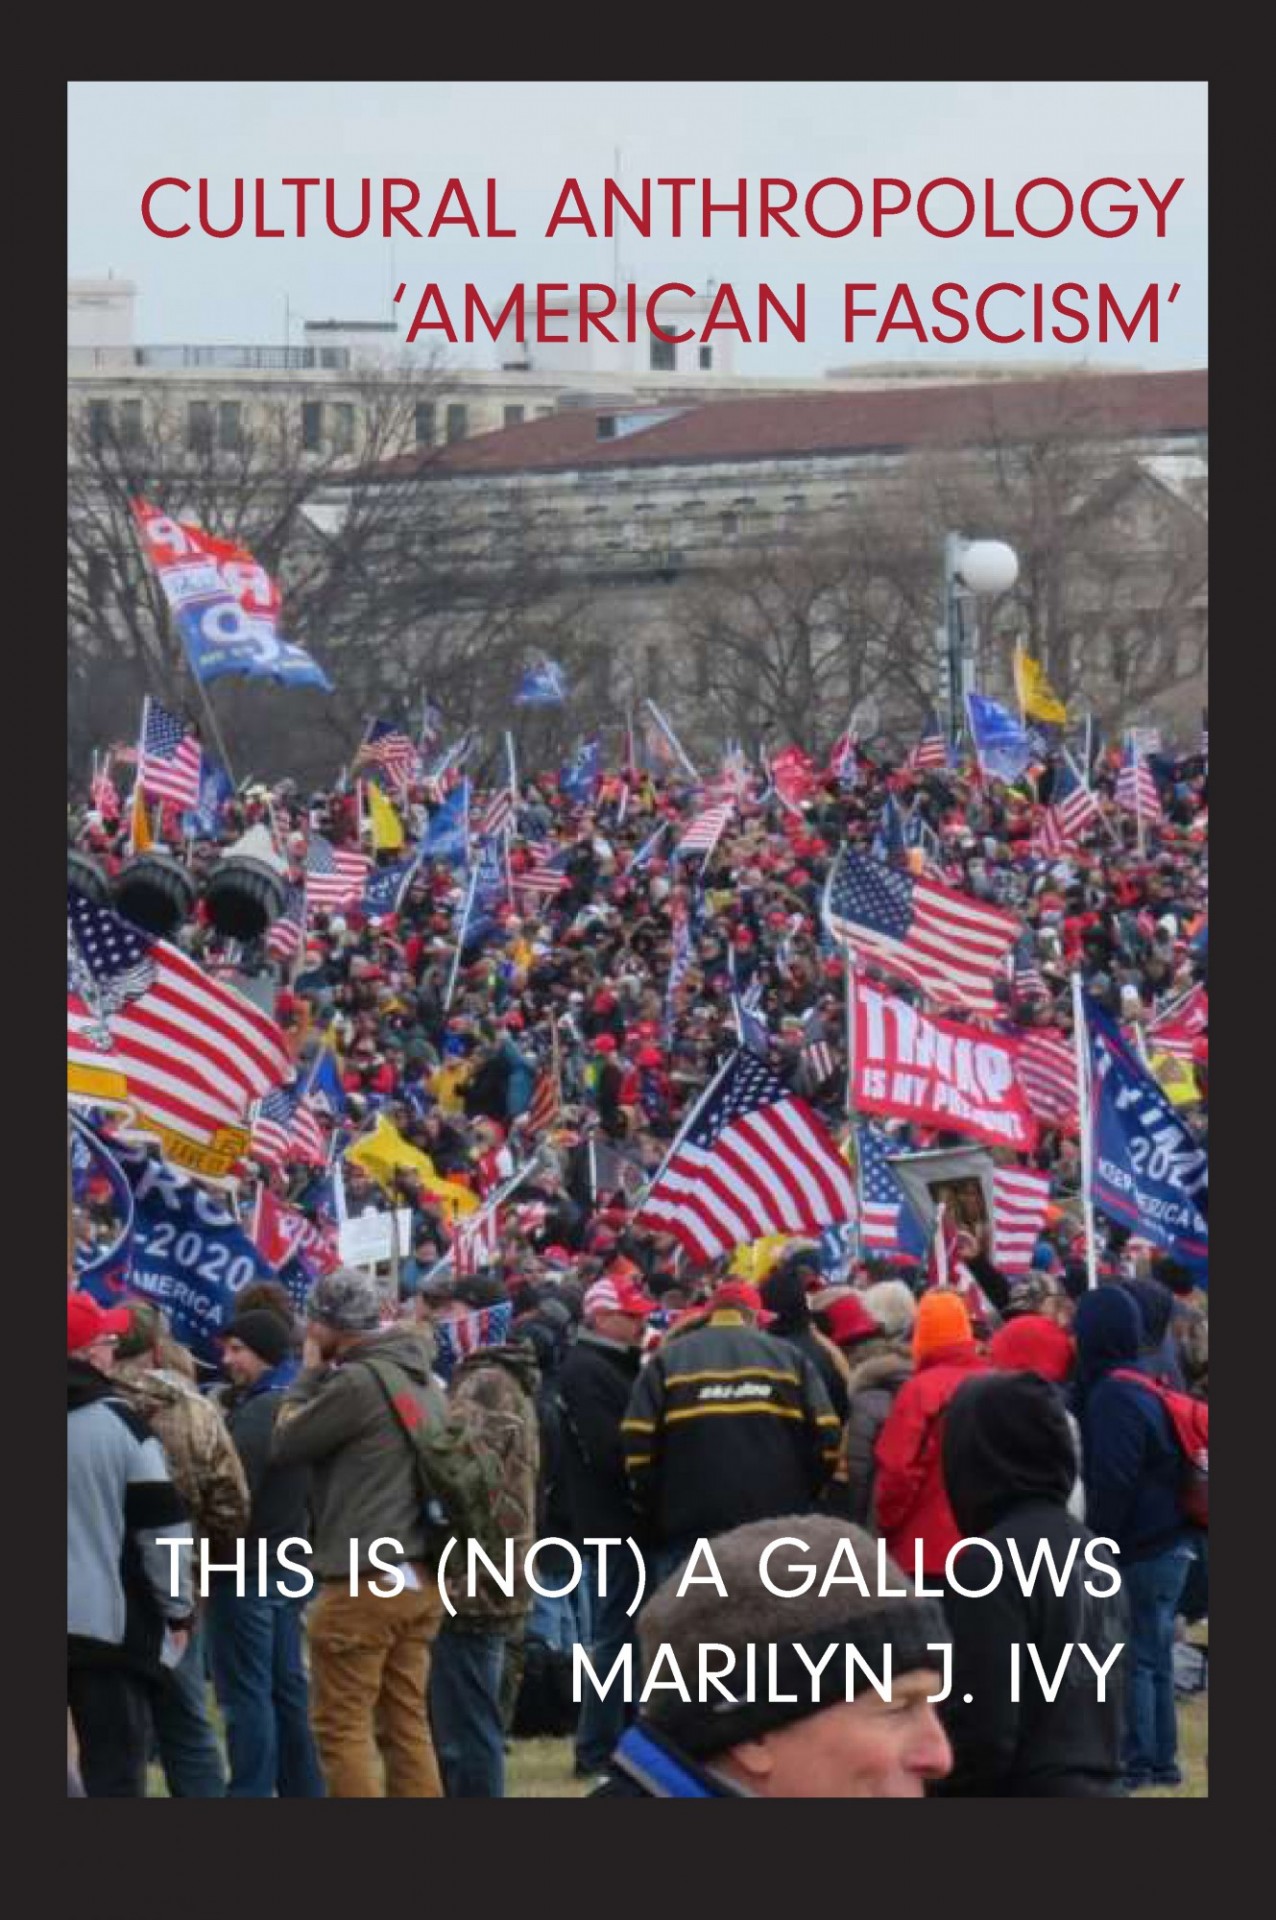 Cultural Anthropology, 'American Fascism', Marilyn J. Ivy, 'This is (Not) a Gallows'